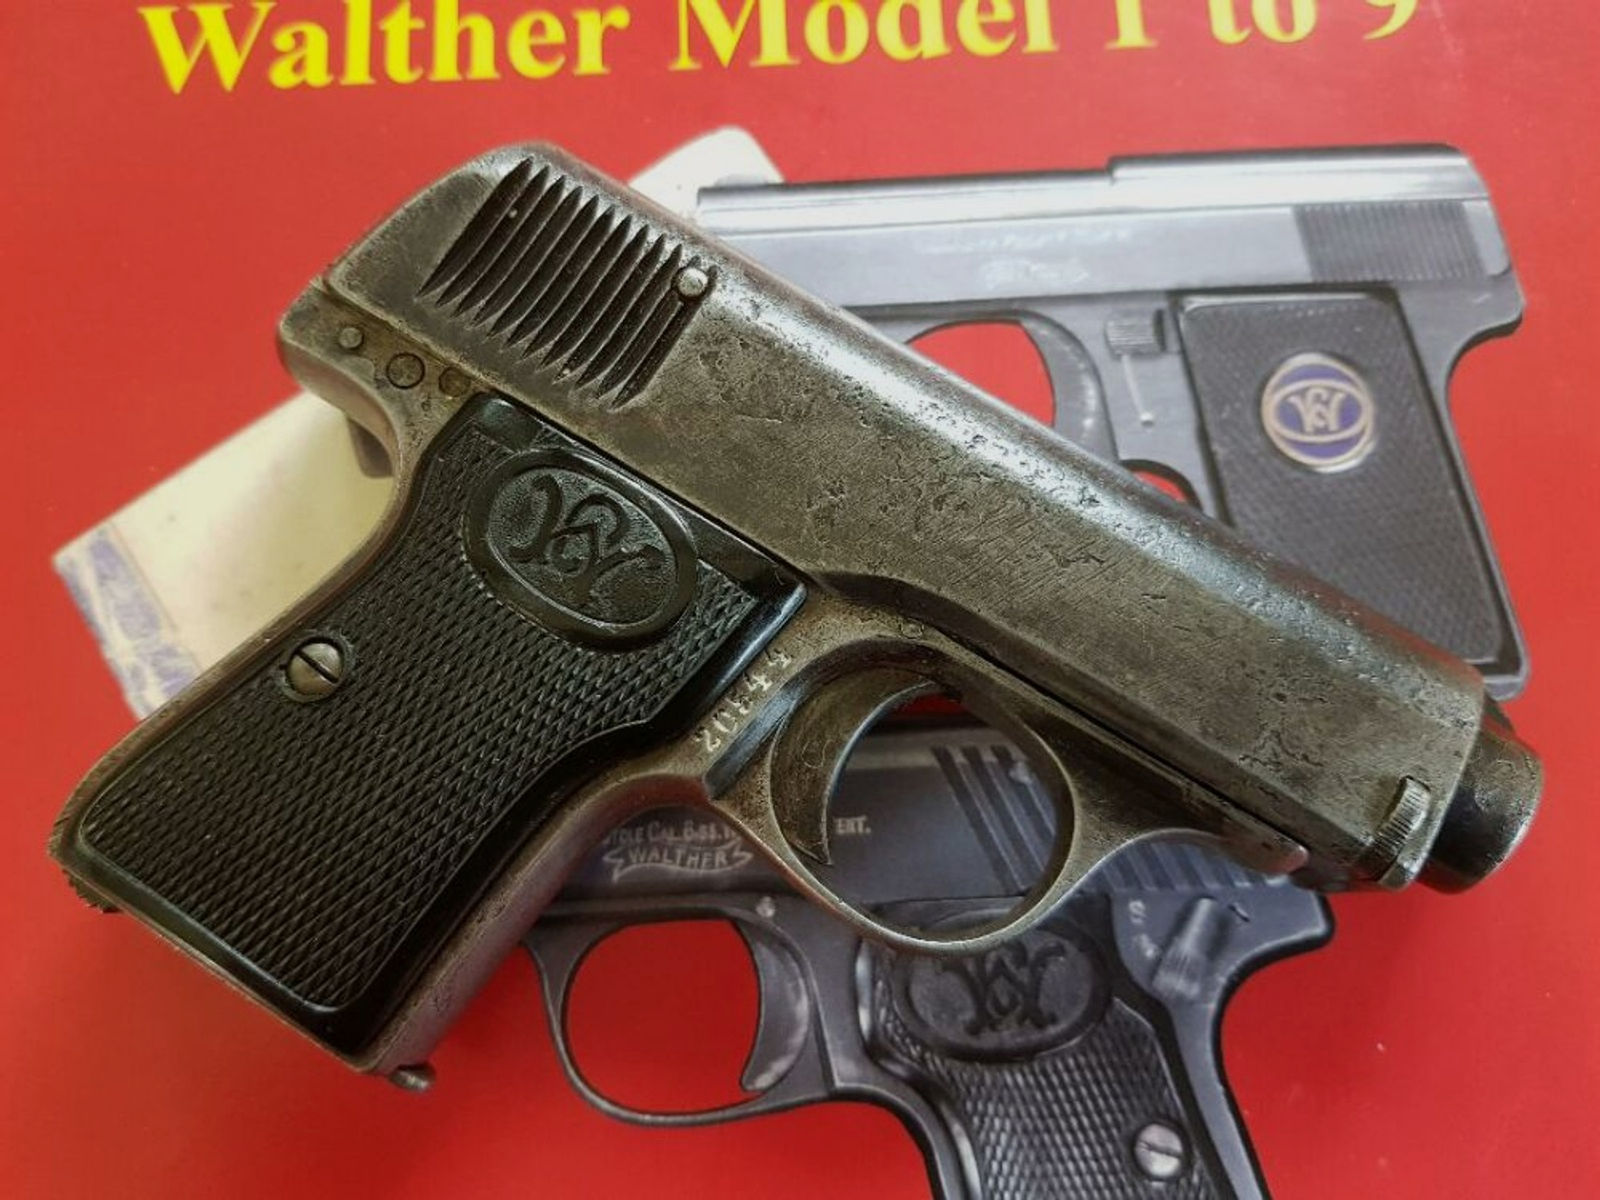 Walther	 3